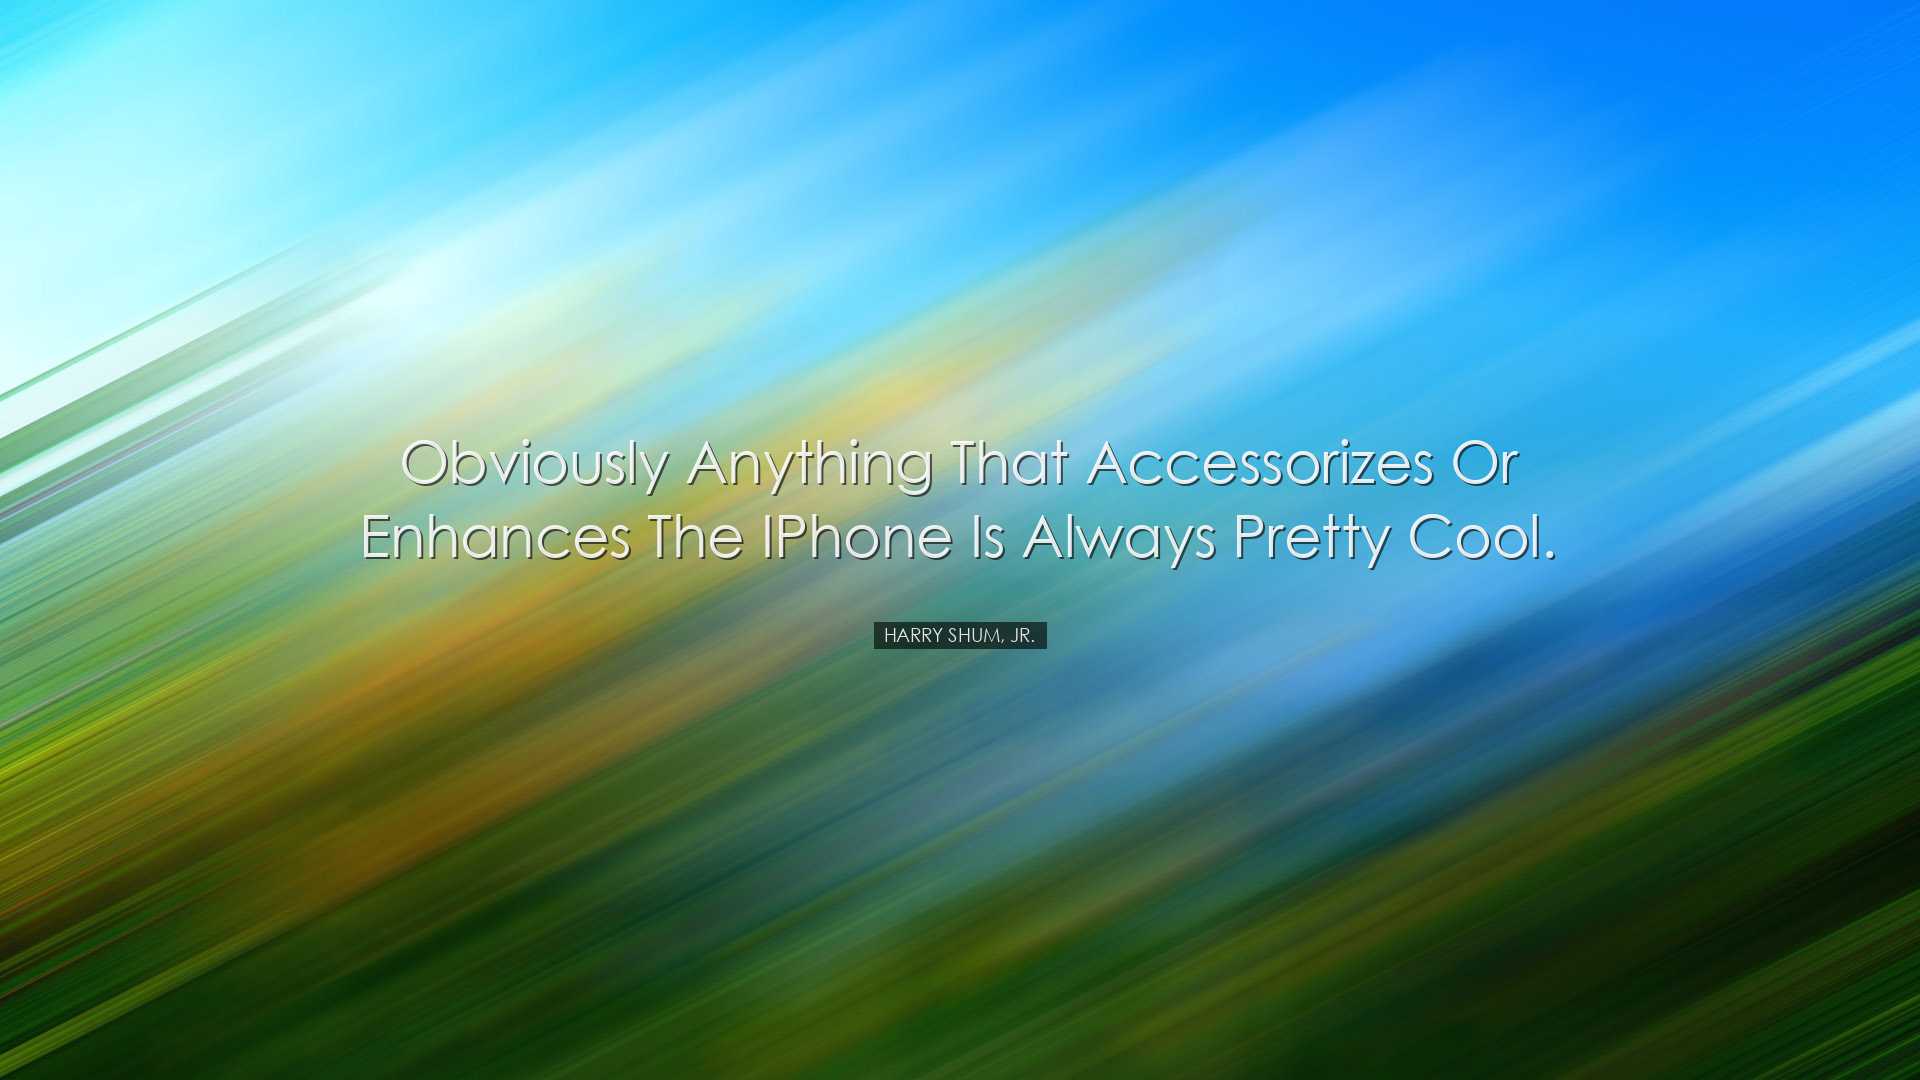 Obviously anything that accessorizes or enhances the iPhone is alw